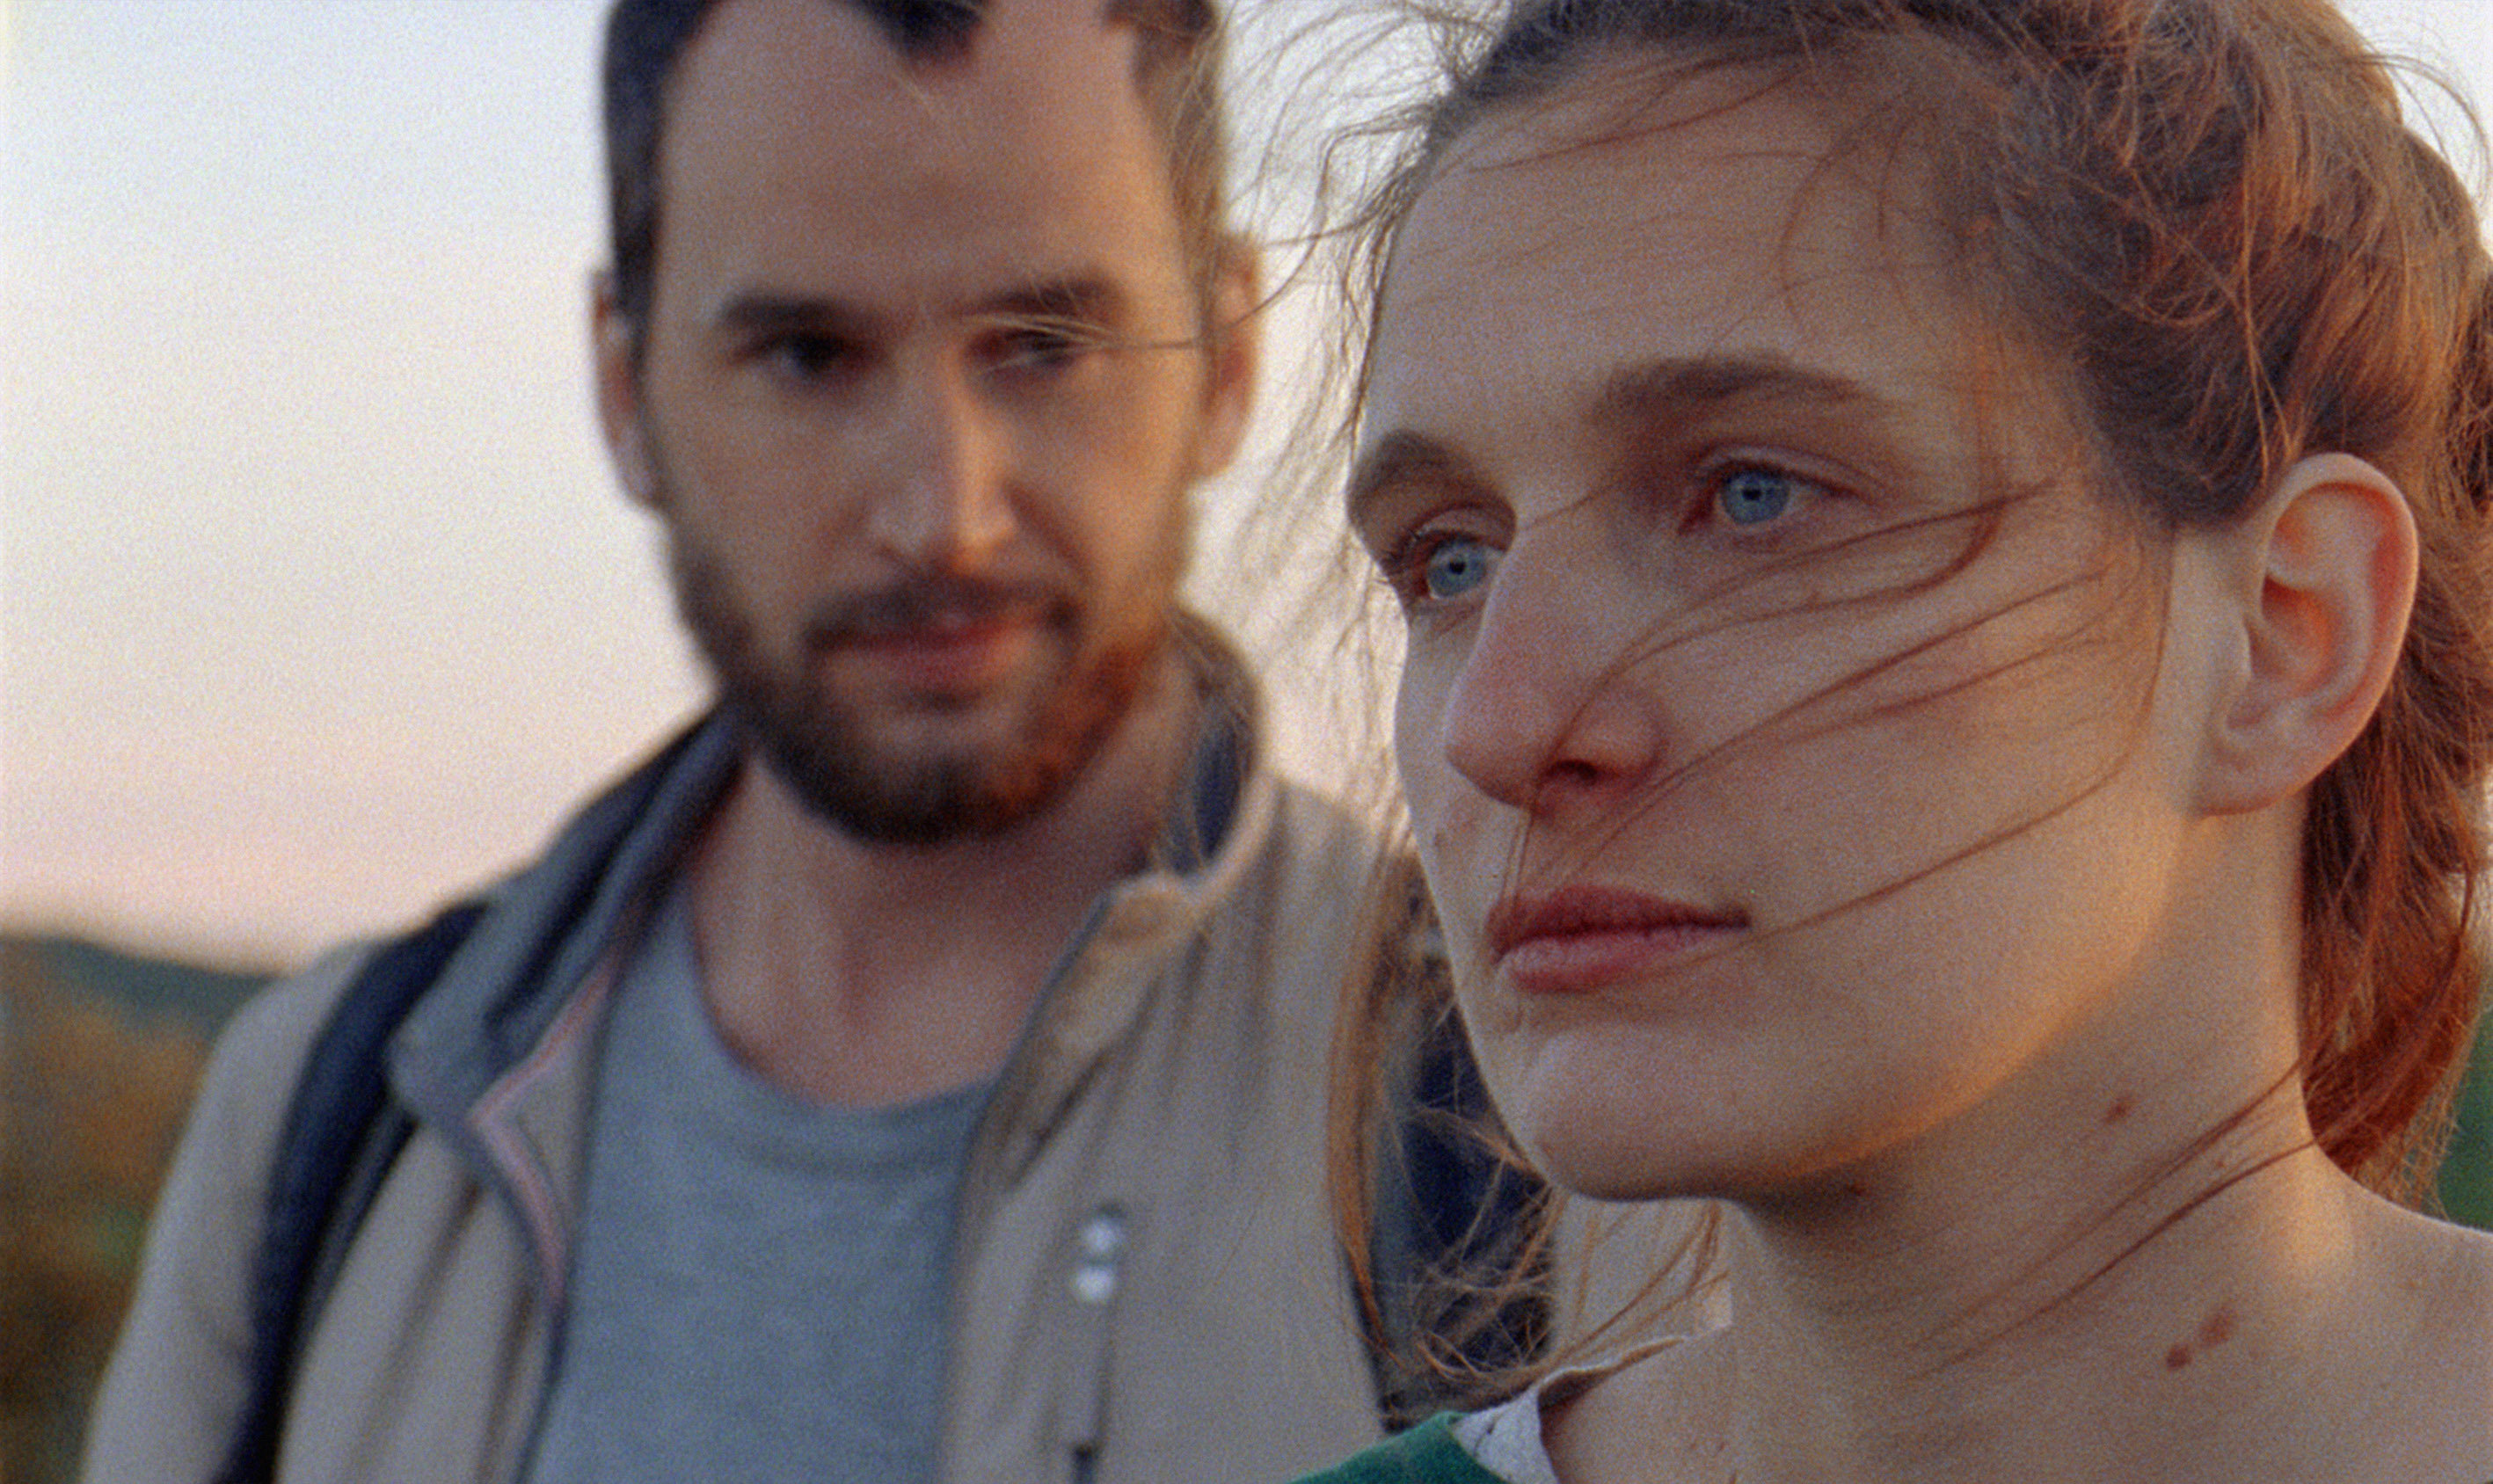 Still of Camille Genaud and Ludovic Chazaud in Le mal du citron (2014)